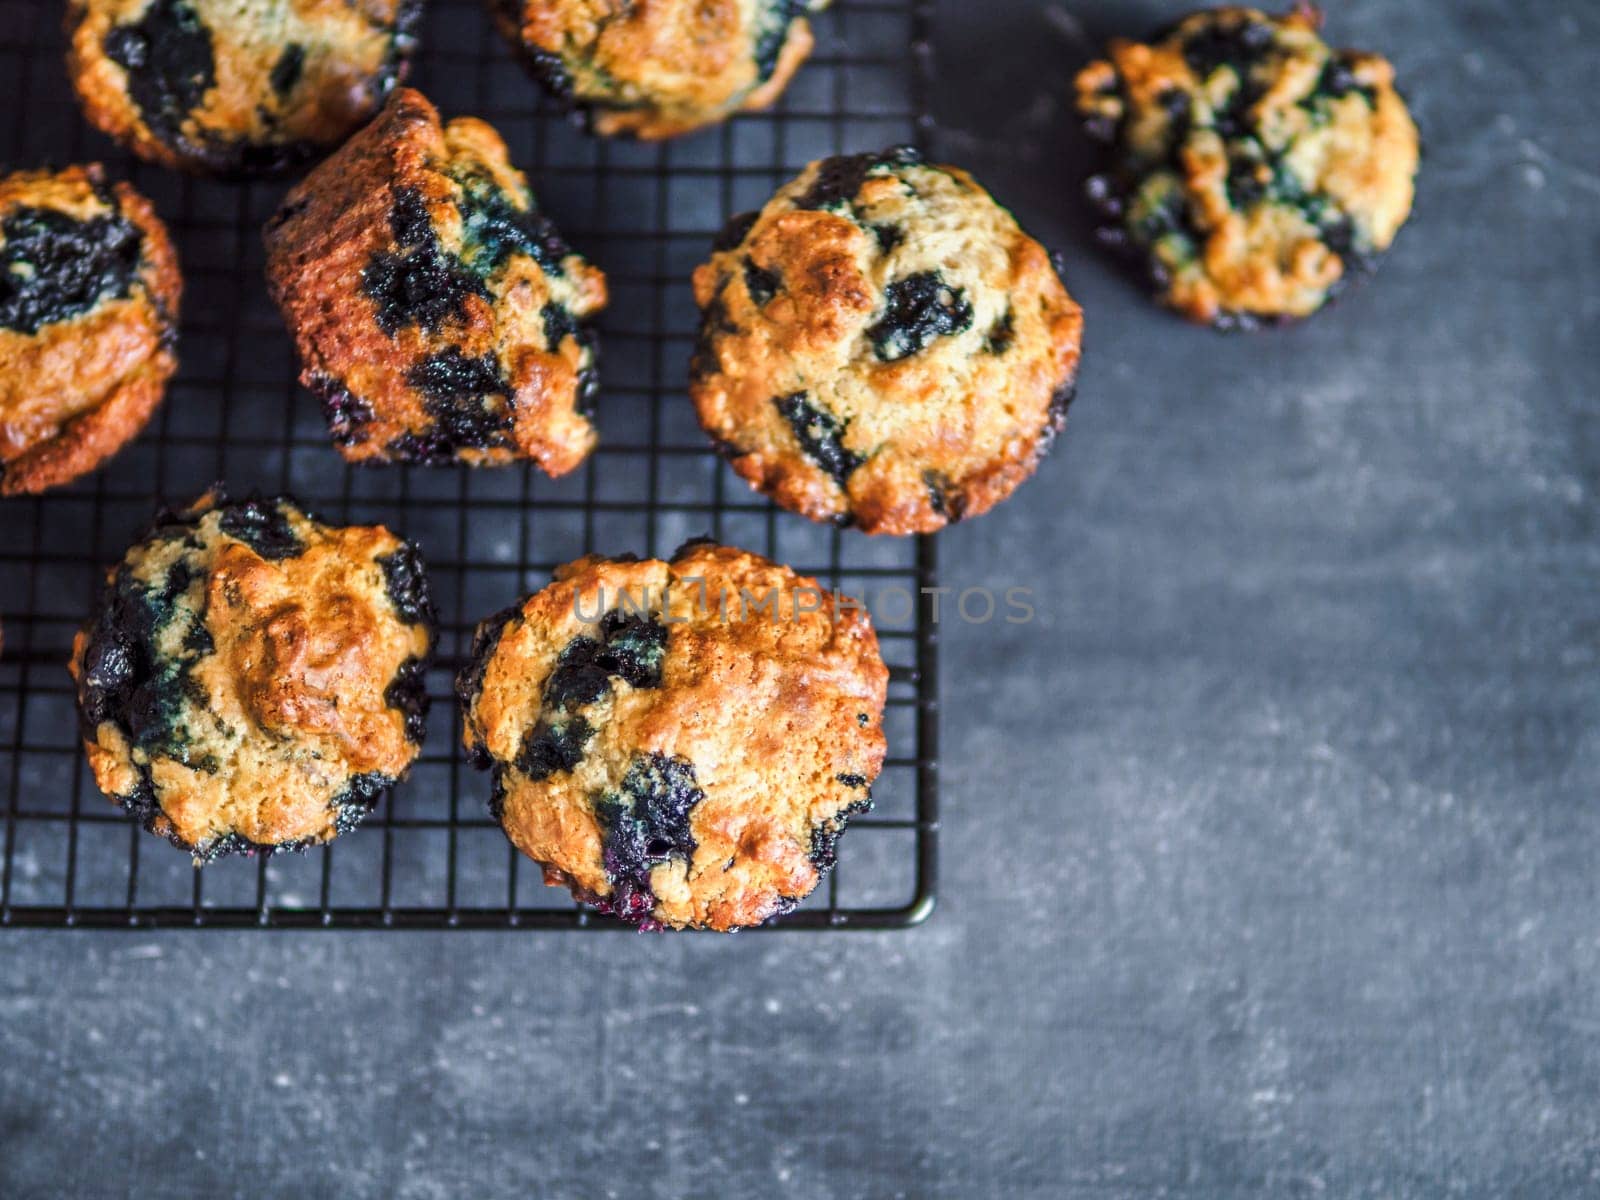 Homemade vegan blueberry muffins on cooling rack. Vegetarian egg-free muffins on dark background. Top view or flat lay. Copy space for text or design.